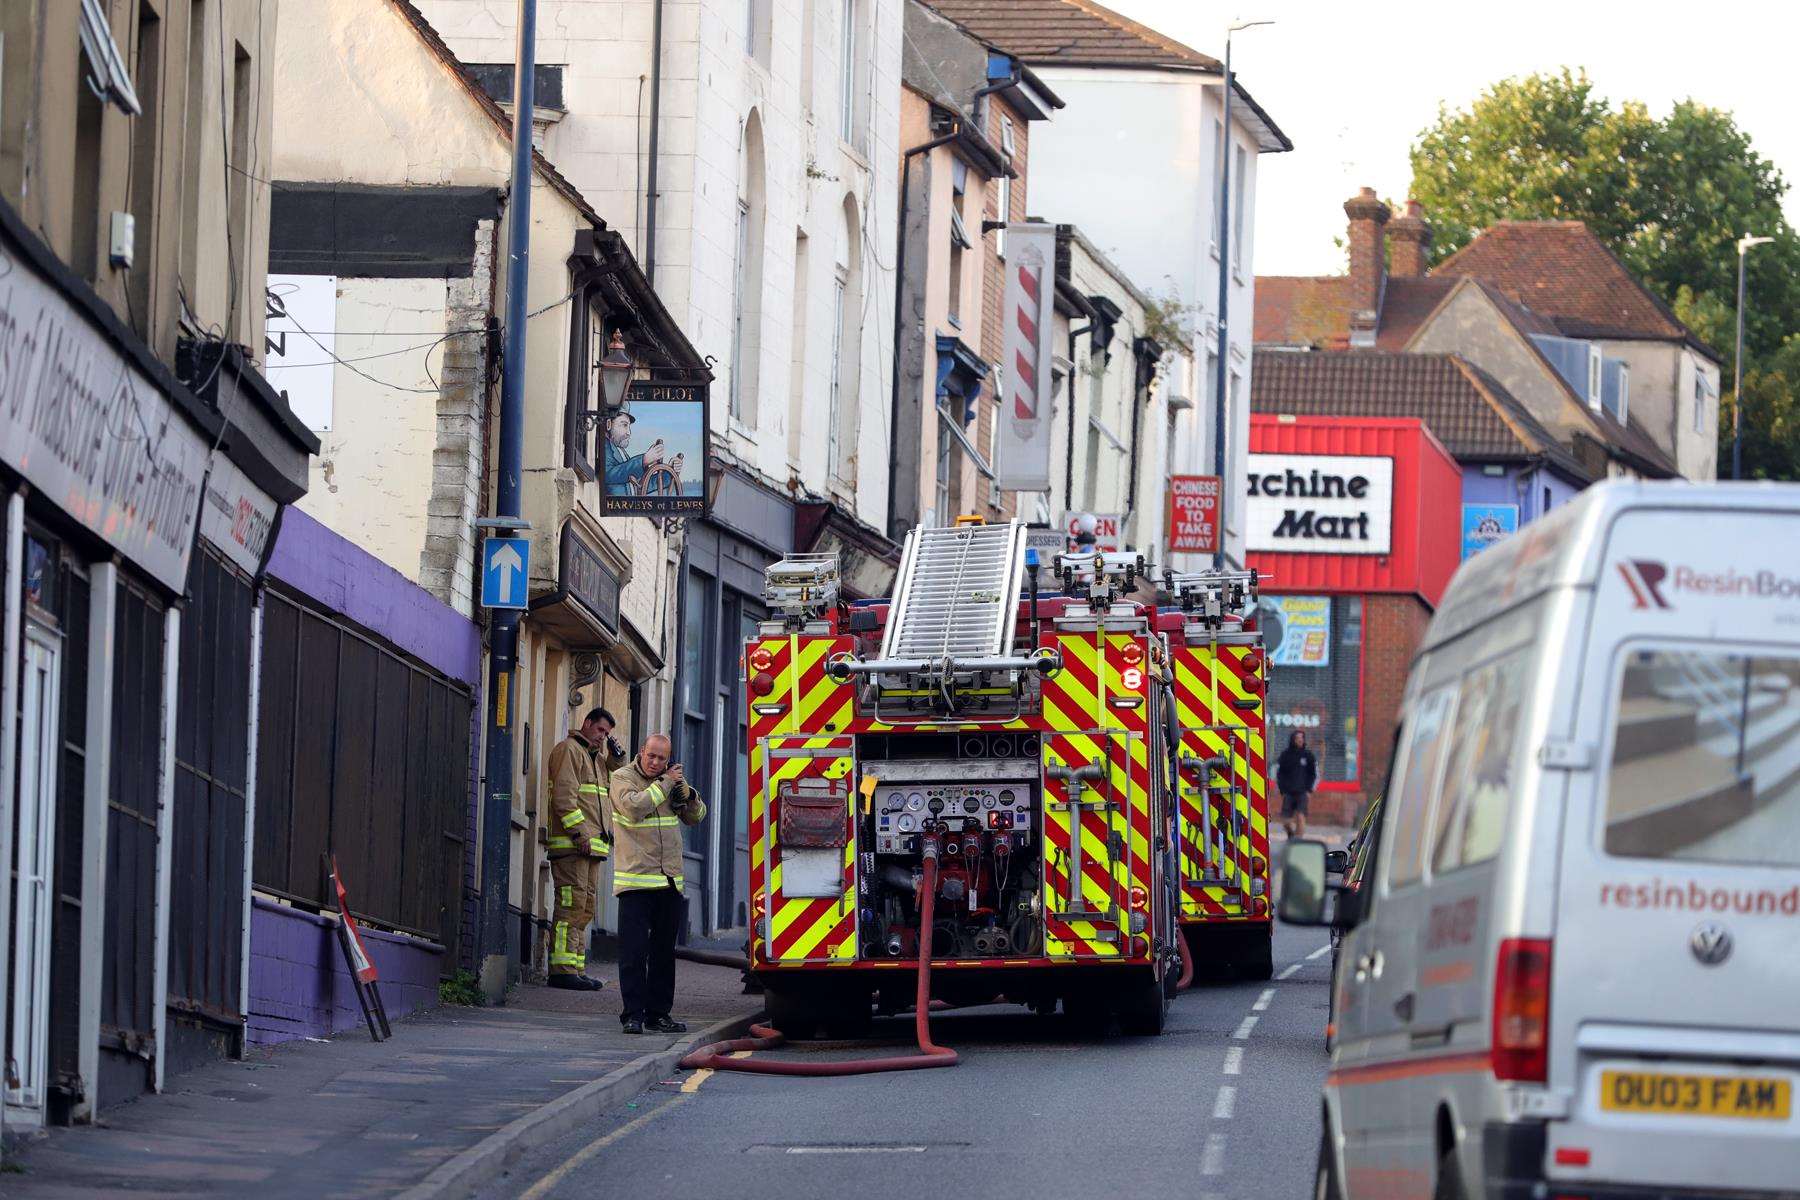 Fire engines outside The Pilot in Upper Stone Street, Maidstone. Photo: Keith Thompson (3160344)